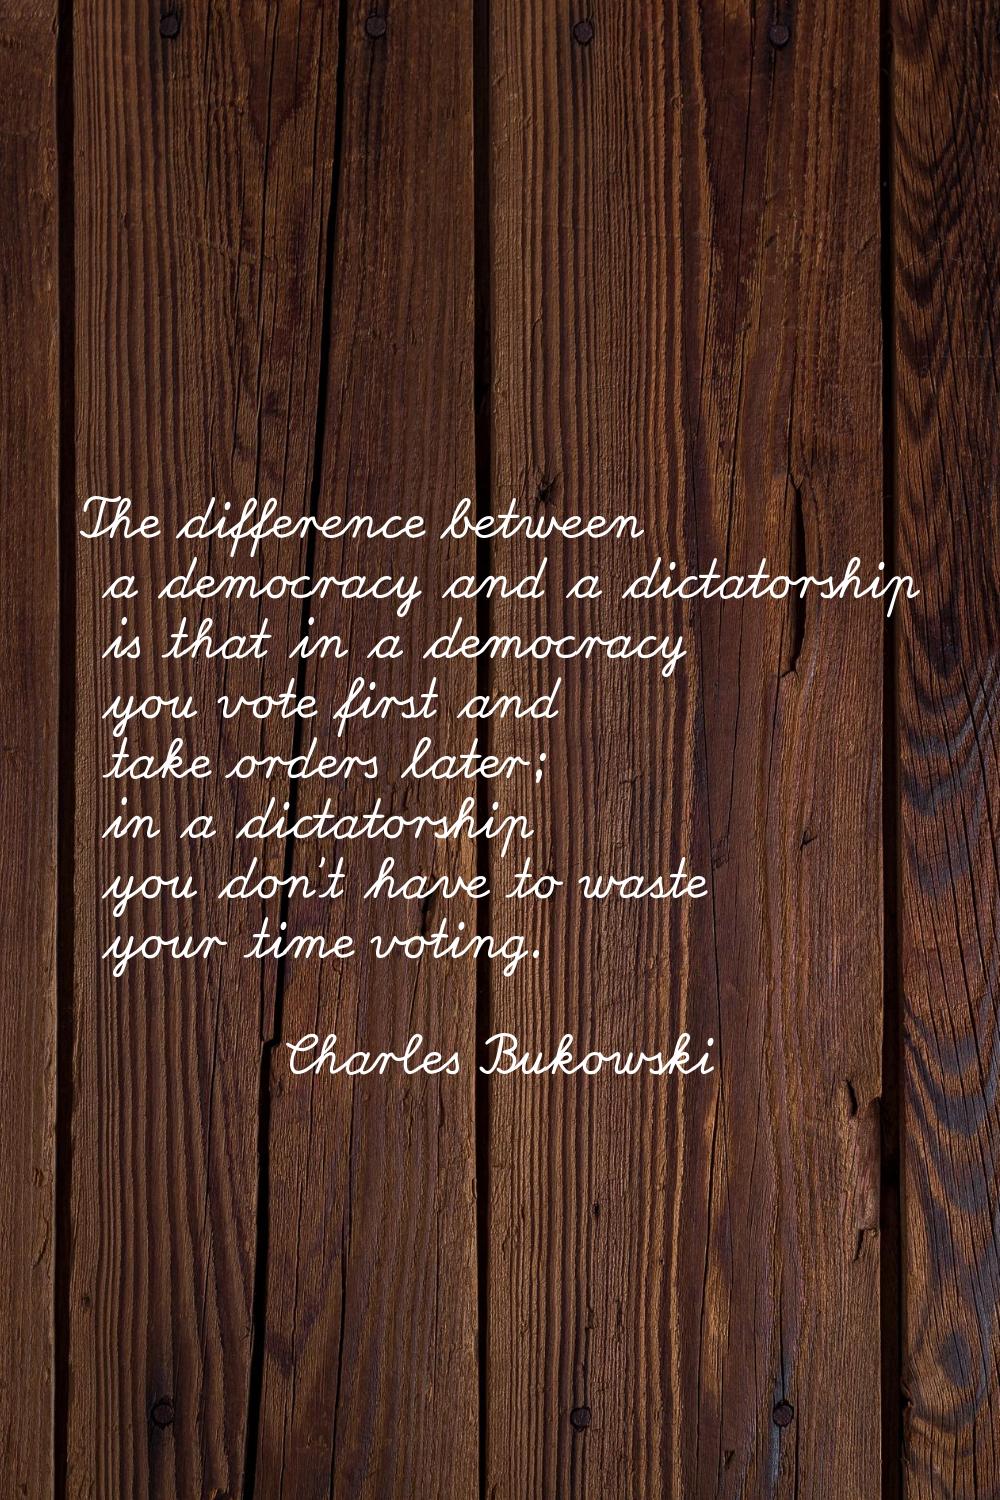 The difference between a democracy and a dictatorship is that in a democracy you vote first and tak